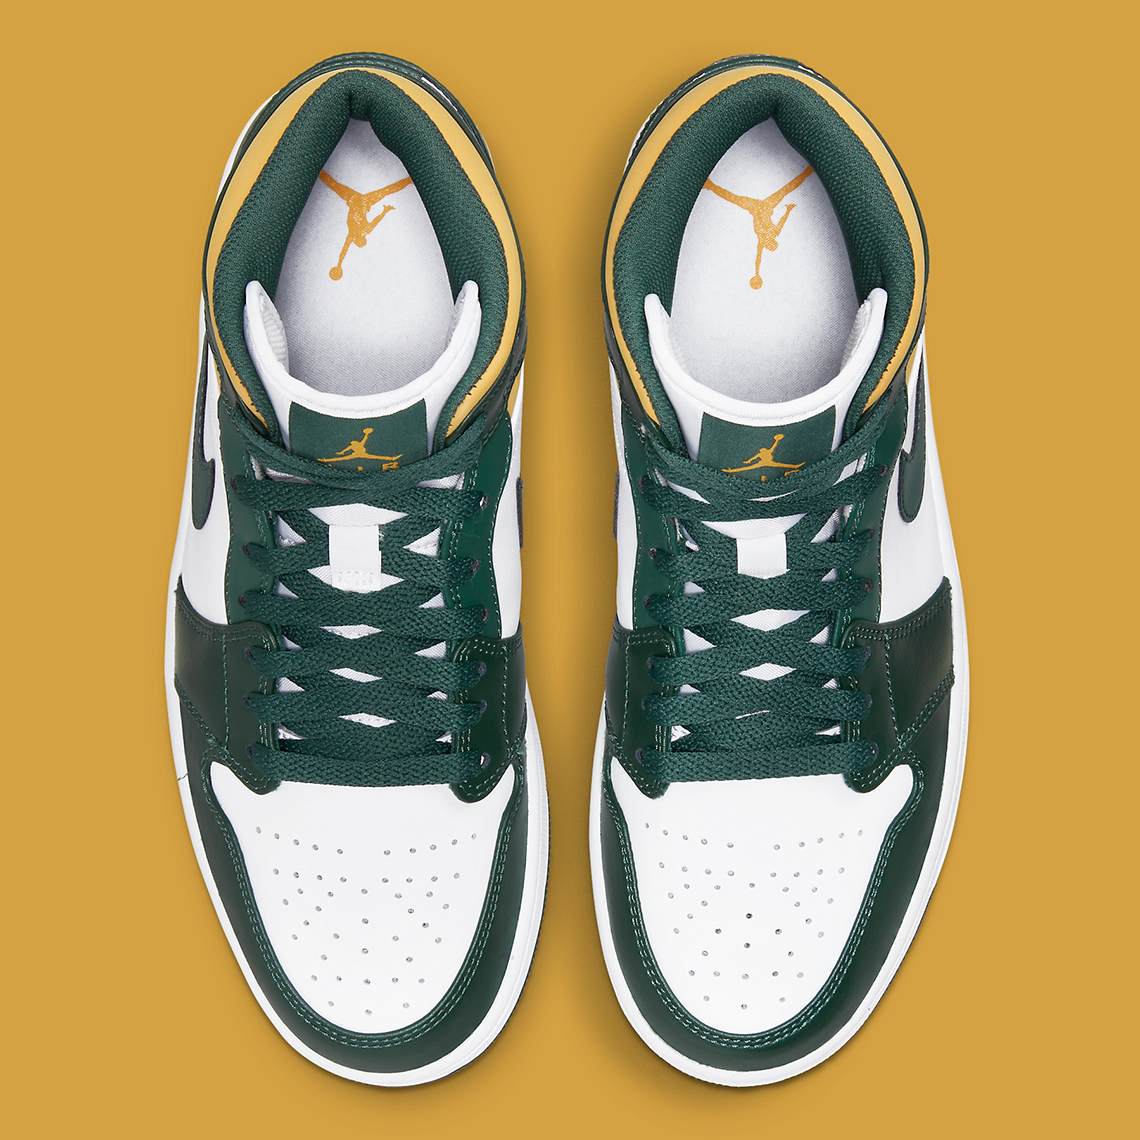 green and yellow shoes jordans